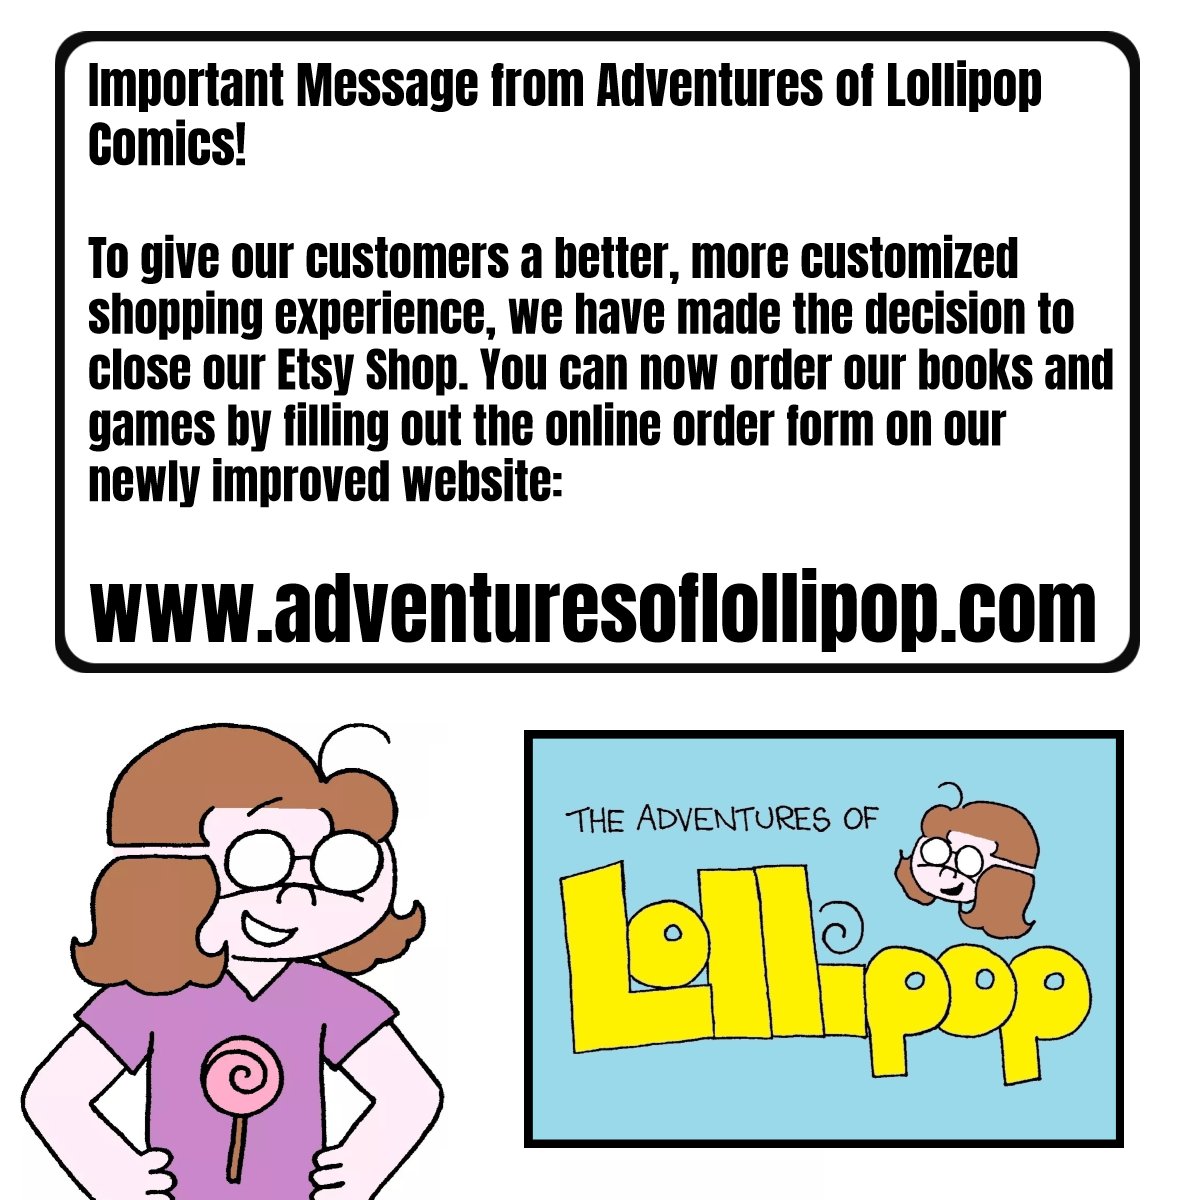 IMPORTANT MESSAGE from Adventures of Lollipop Comics! To give customers a better, more customized shopping experience, we have made the decision to close our Etsy Shop. You can now order by filling out the online order form on our newly improved website! adventuresoflollipop.com